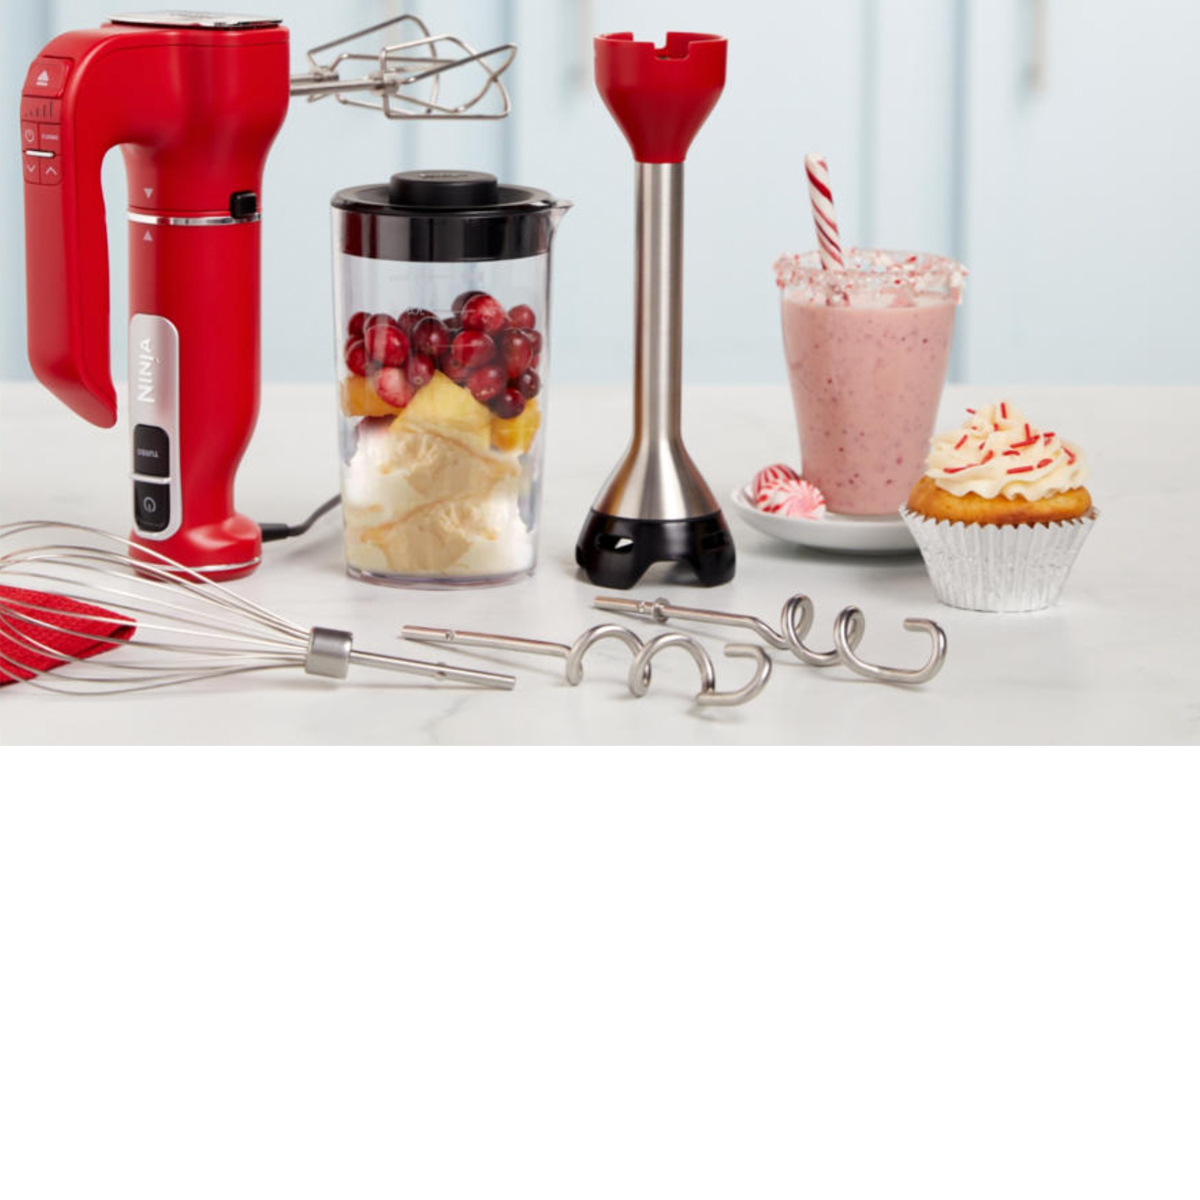 New Ninja Foodi Power Mixer System Immersion Blender with